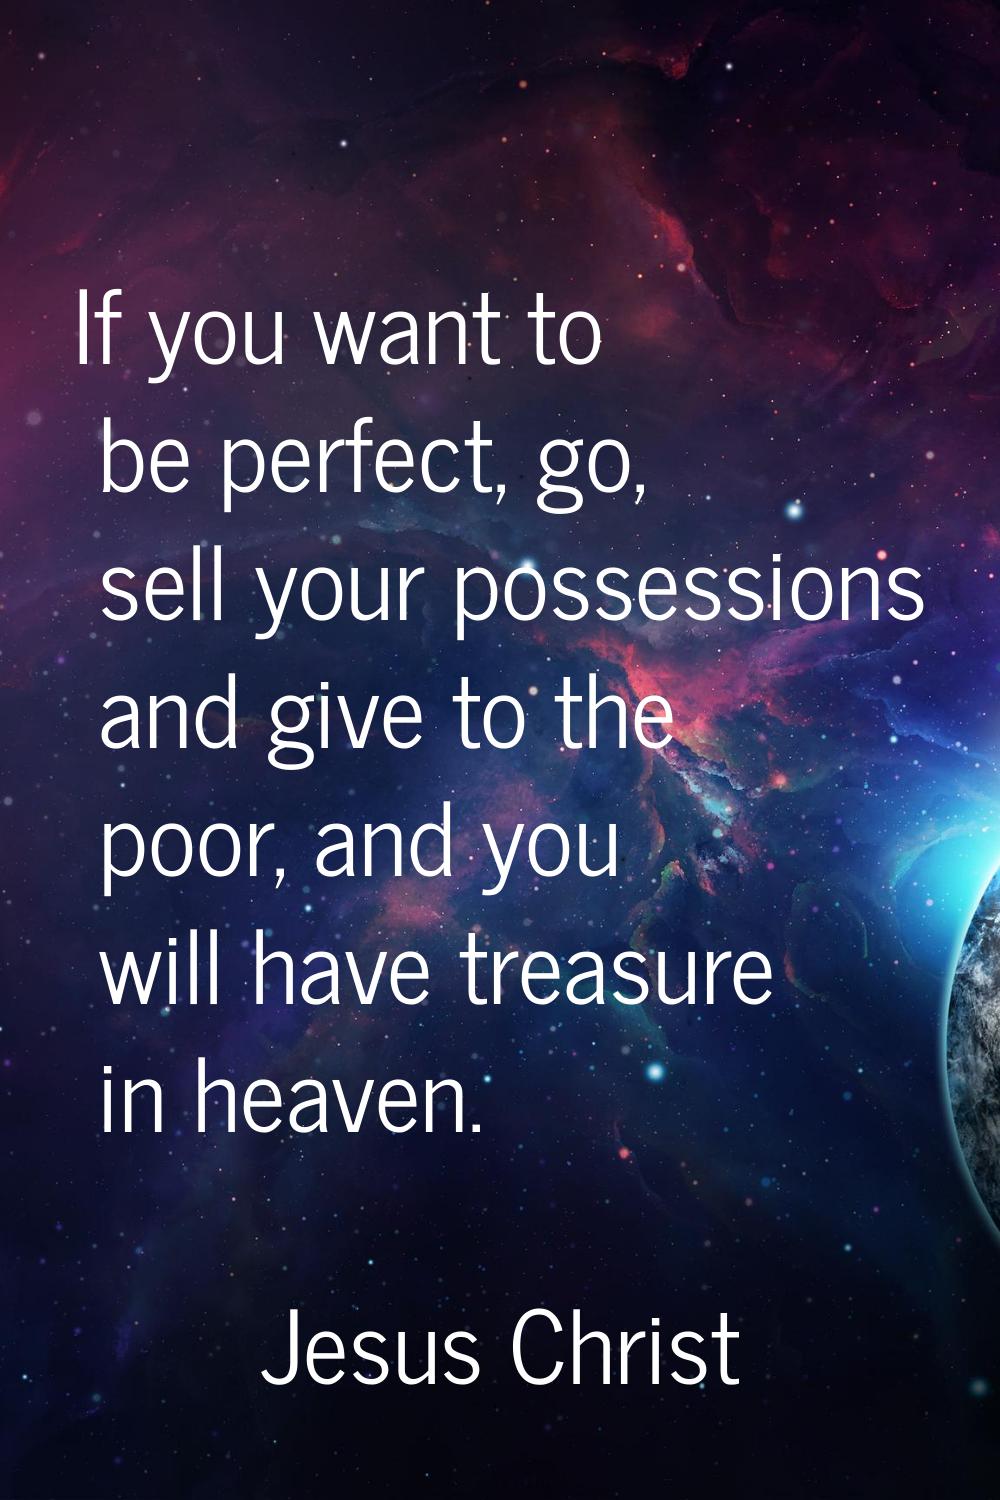 If you want to be perfect, go, sell your possessions and give to the poor, and you will have treasu